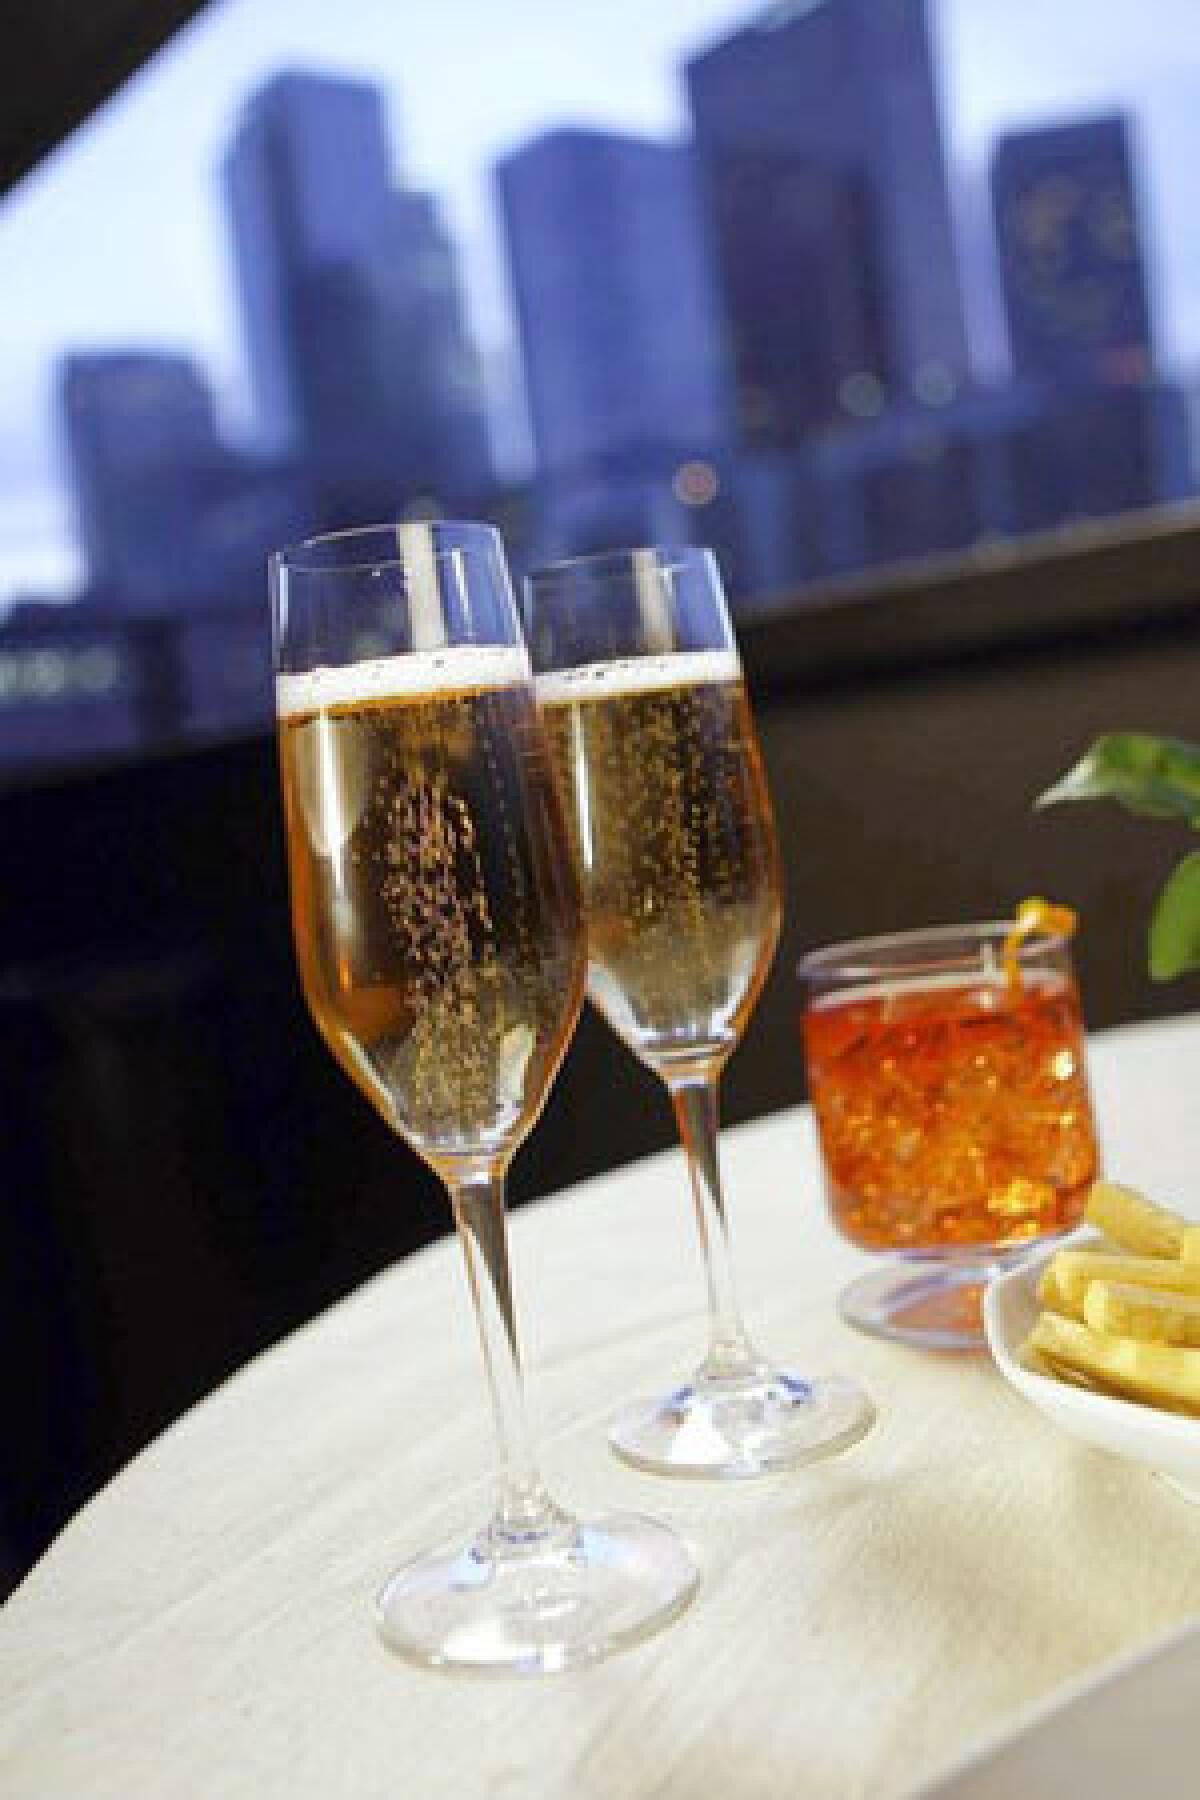 Day-closing aperitifs can include a kir royale, left, Negroni or Campari and soda.